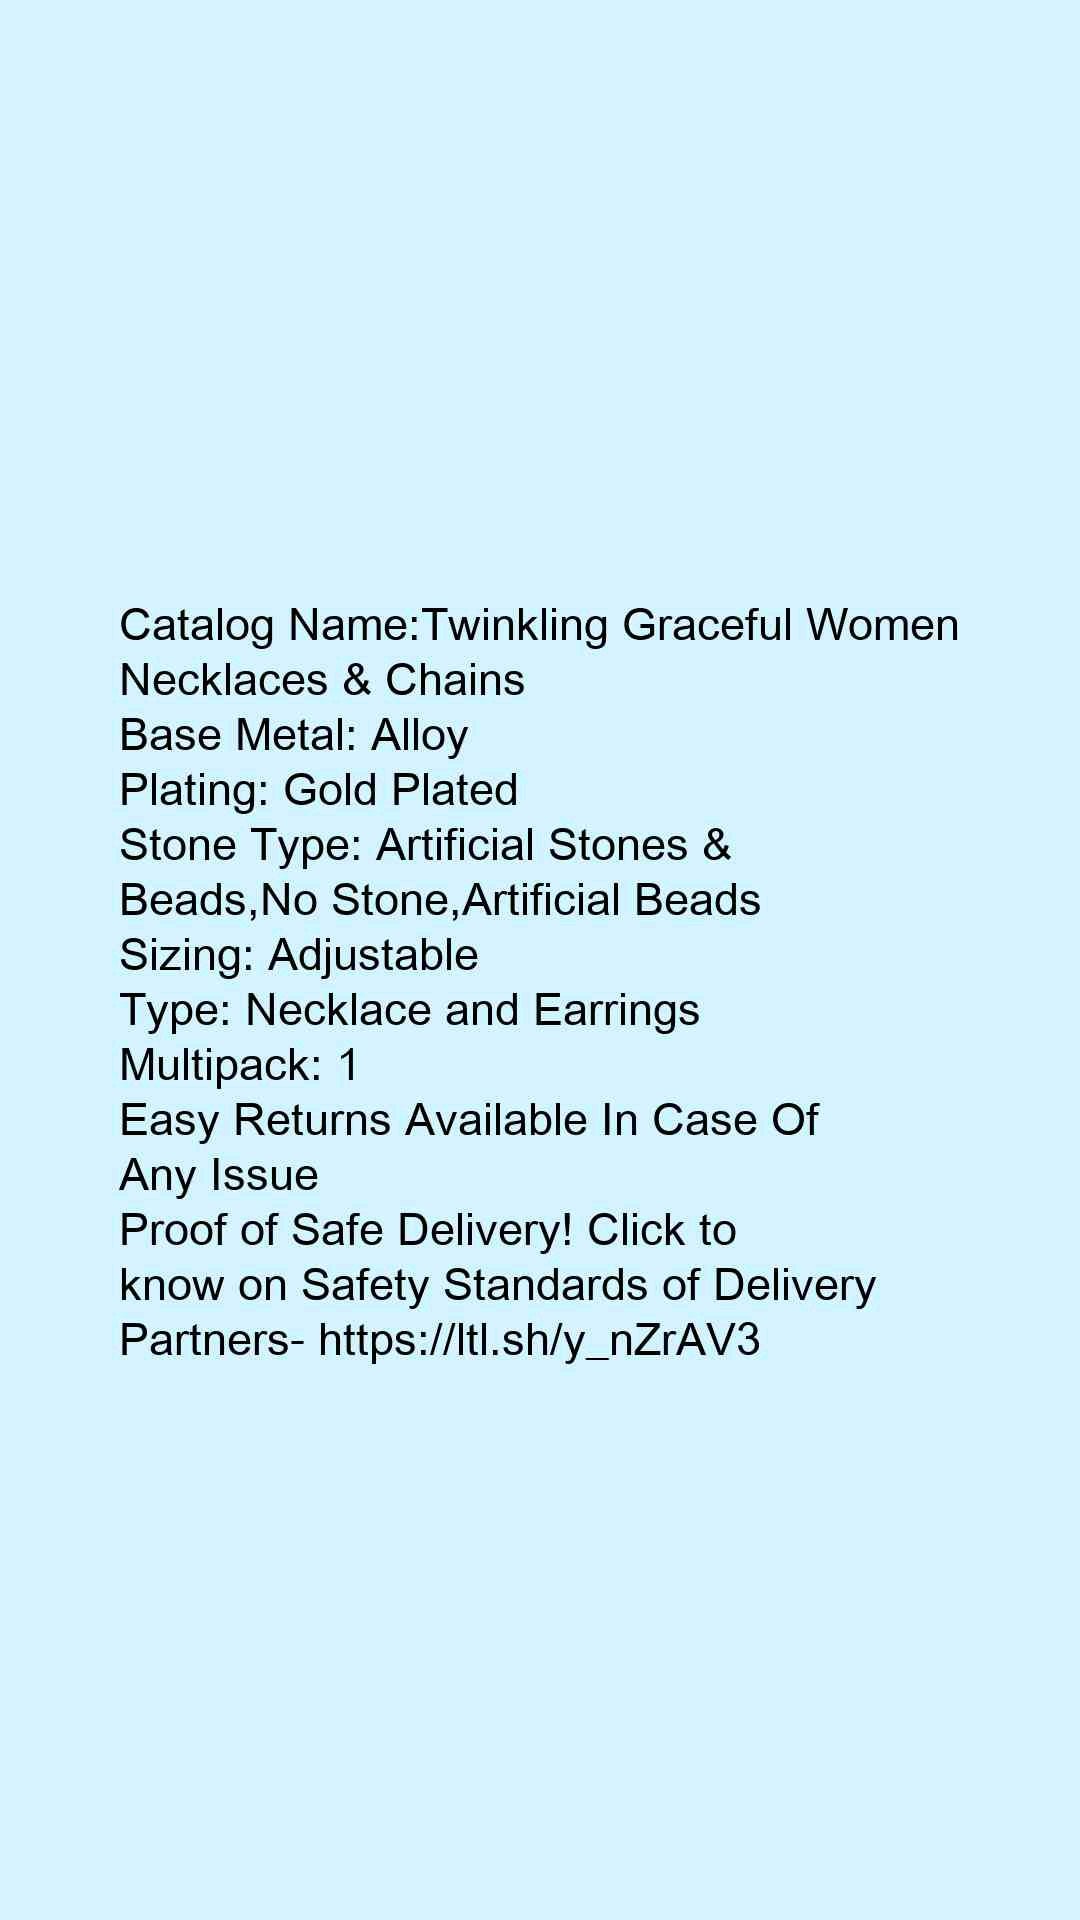 Twinkling Graceful Women Necklaces & Chains